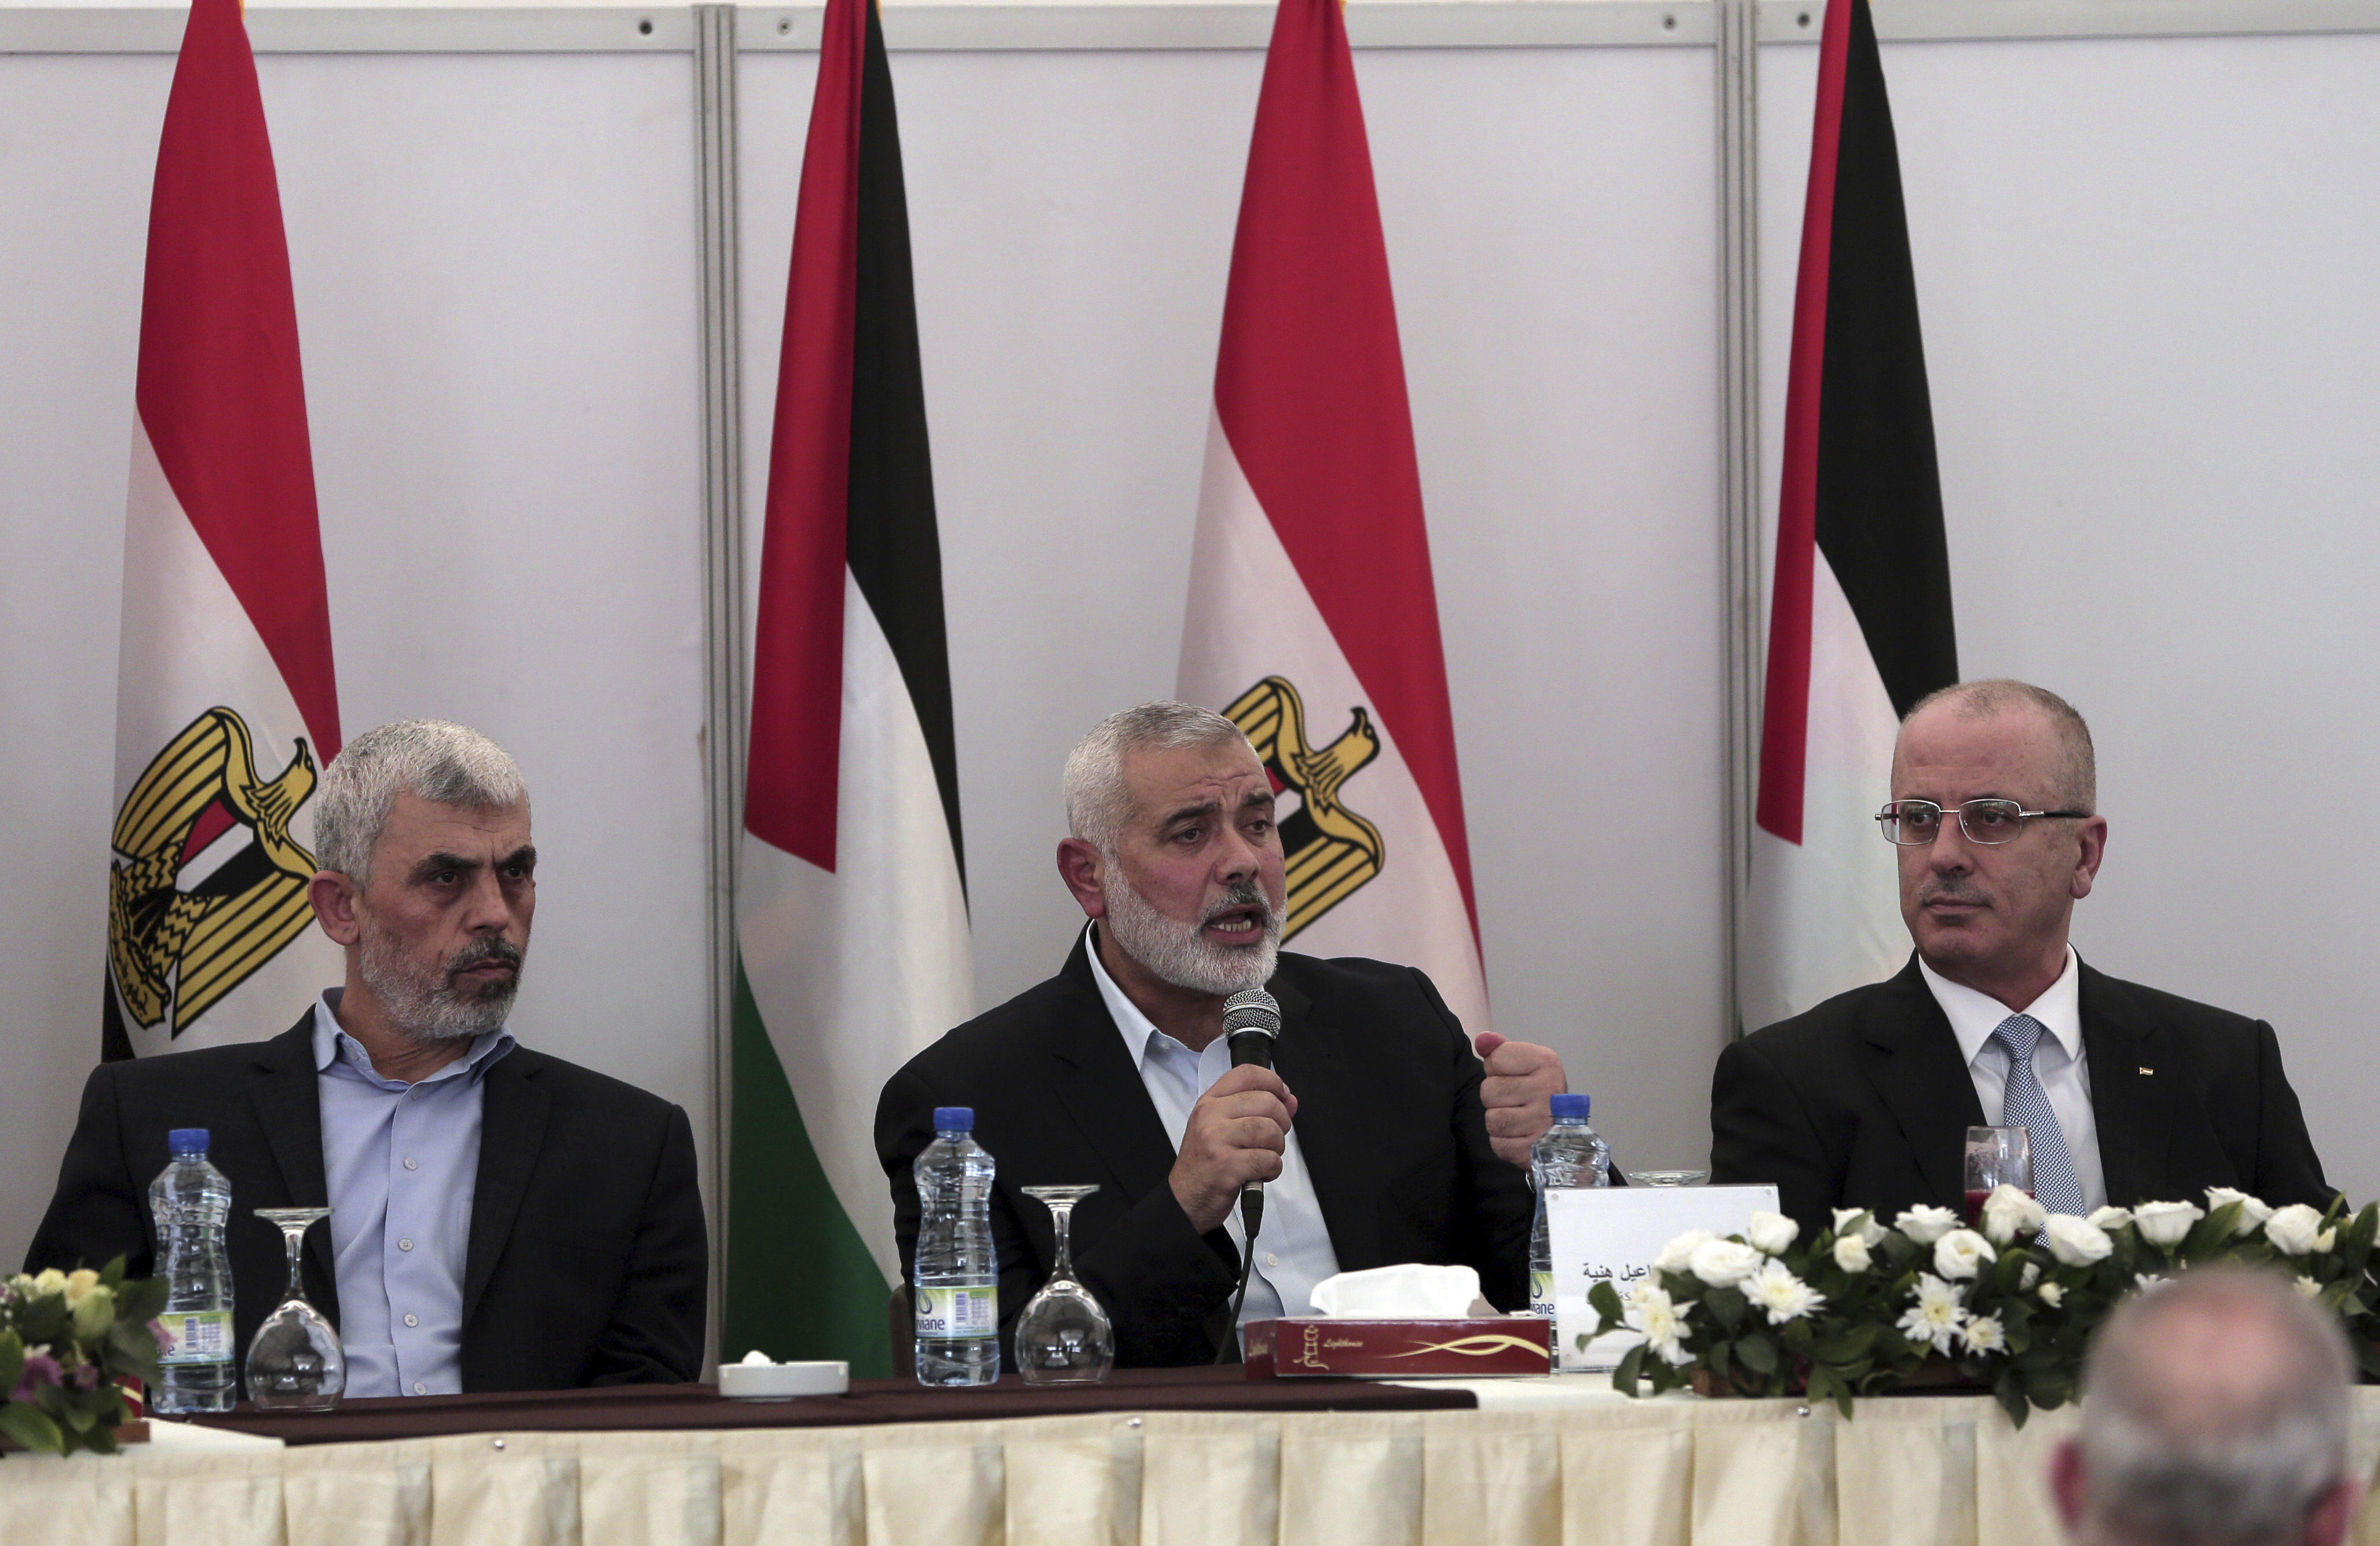 Palestinian Factions Hamas And Fatah Reach Deal On Gaza Strip Control In Egypt Talks Cbs News